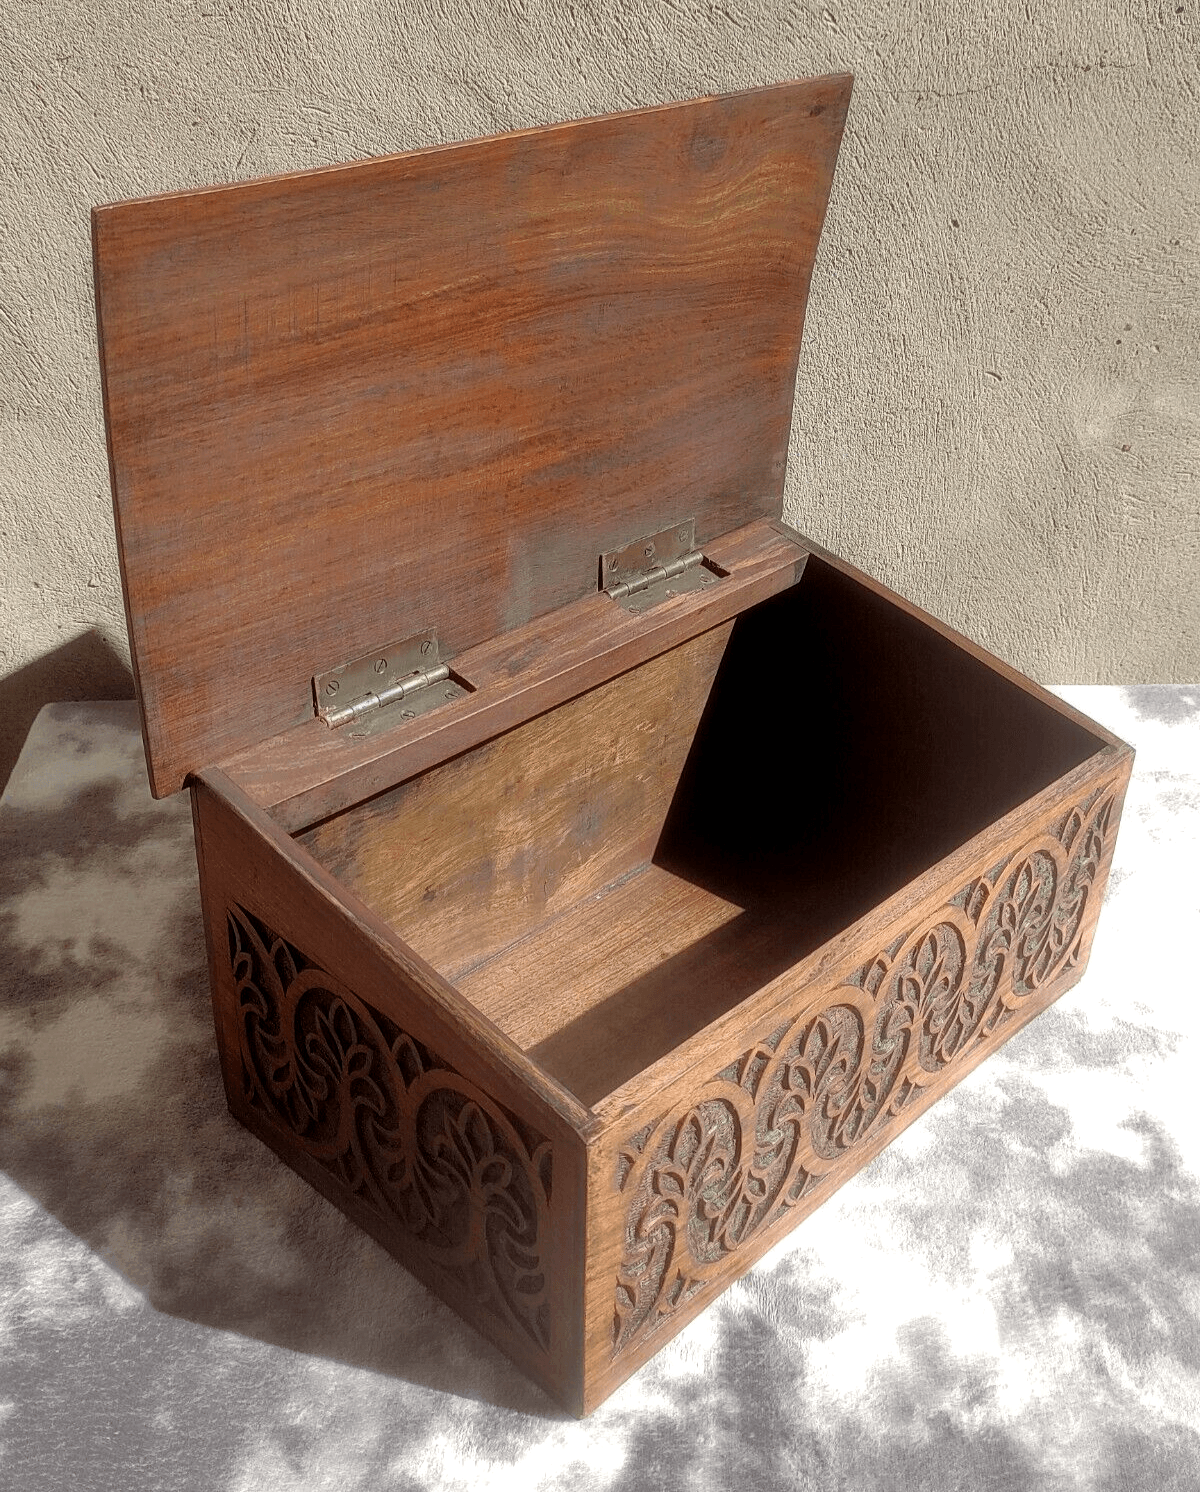 English Antique Carved Strapwork Mahogany Desk Bible Candle Box - Tommy's Treasure